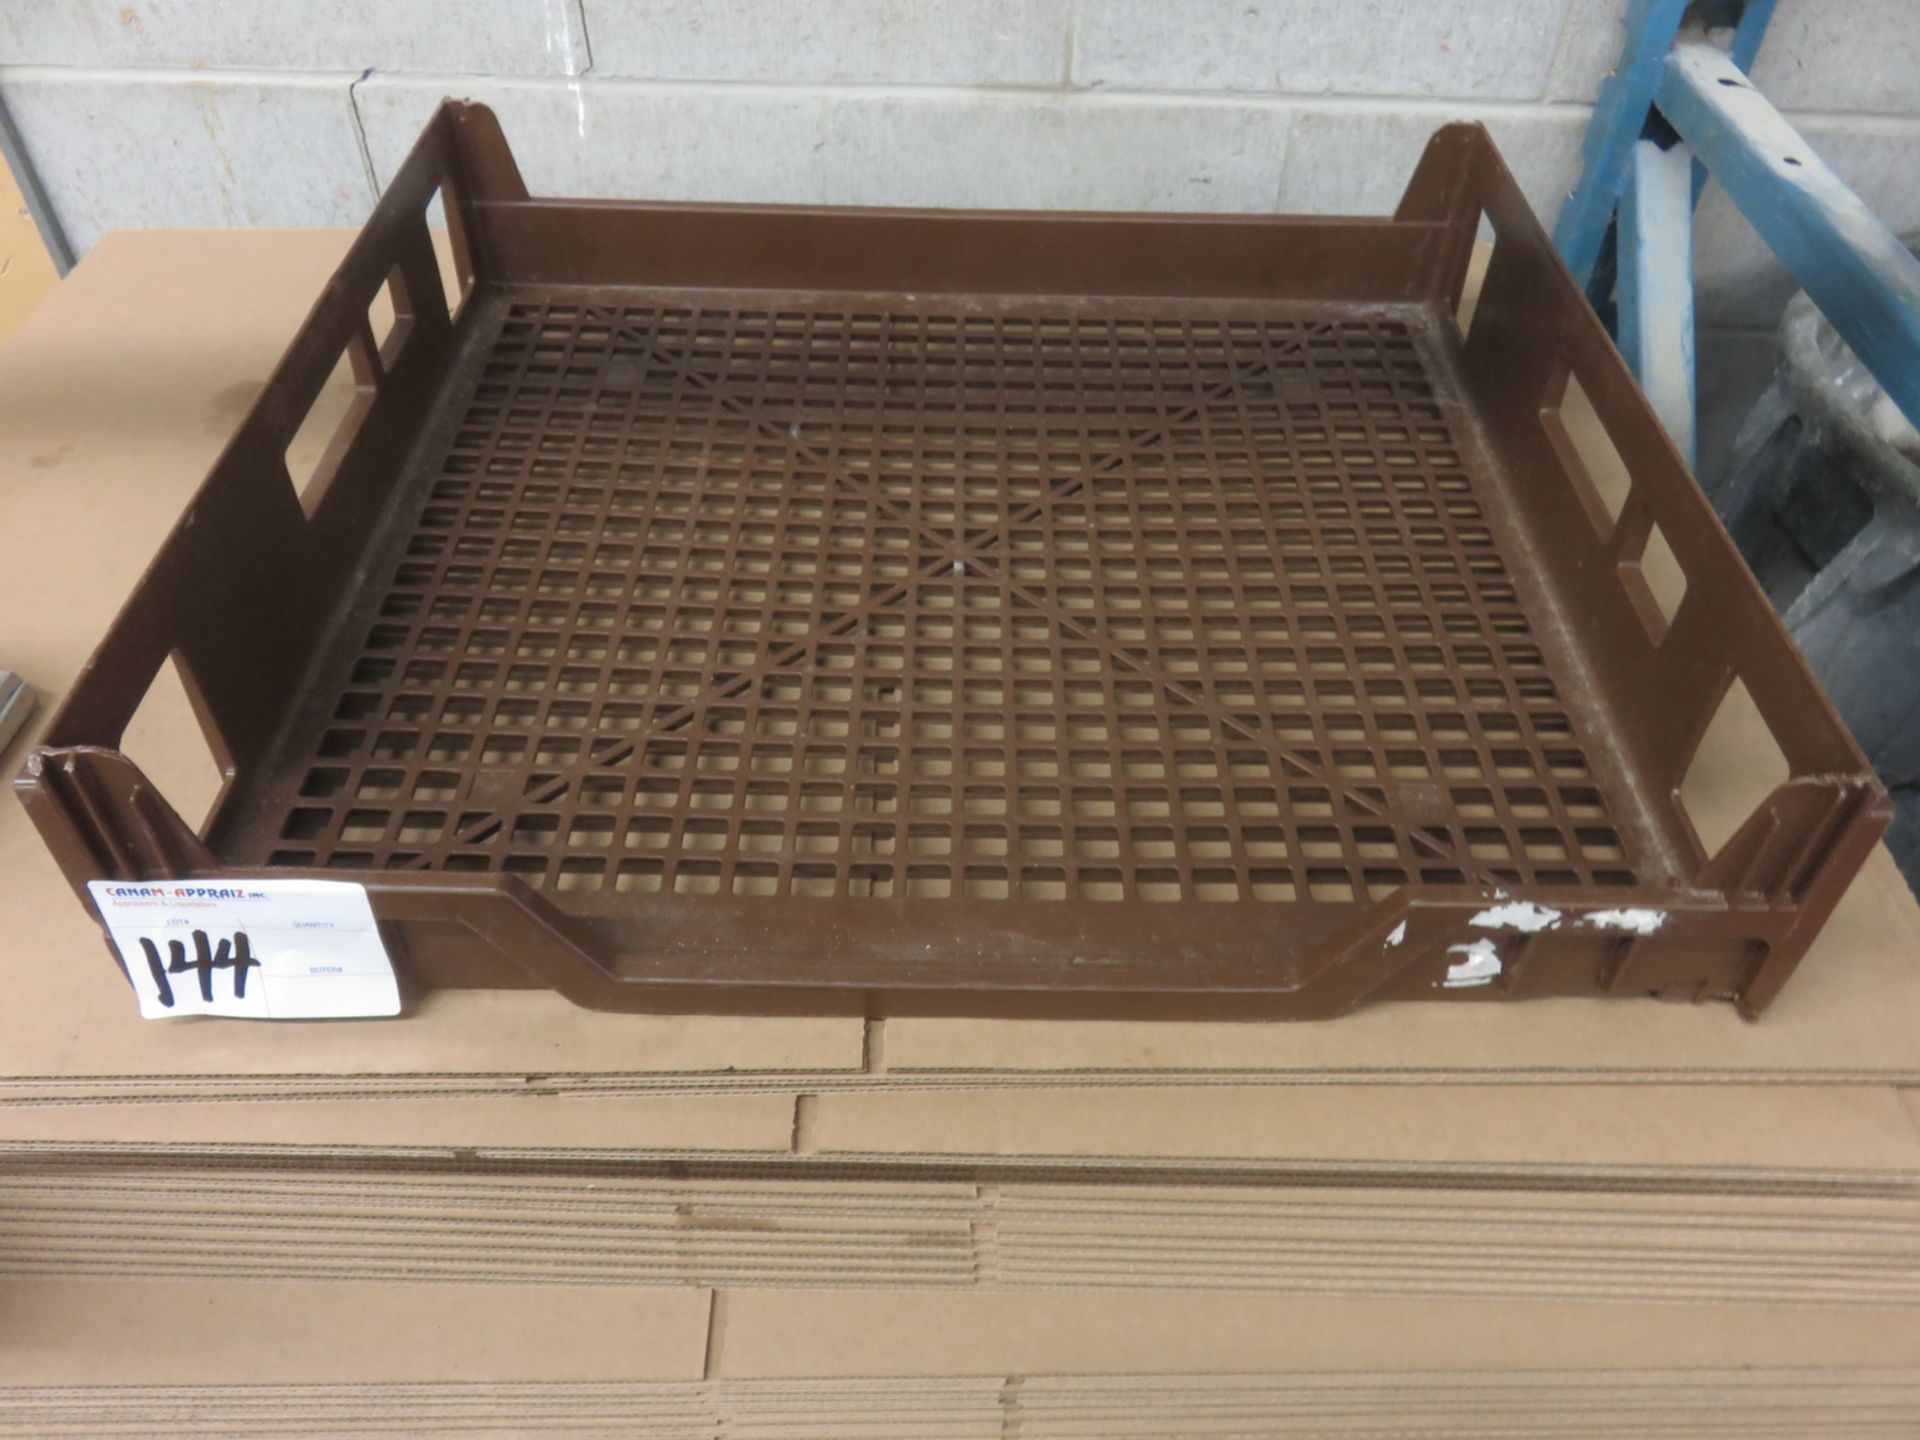 UNITS - BROWN PLASTIC APPROX. 23" X 26" X 6"H STACKABLE BAKERY TRAYS